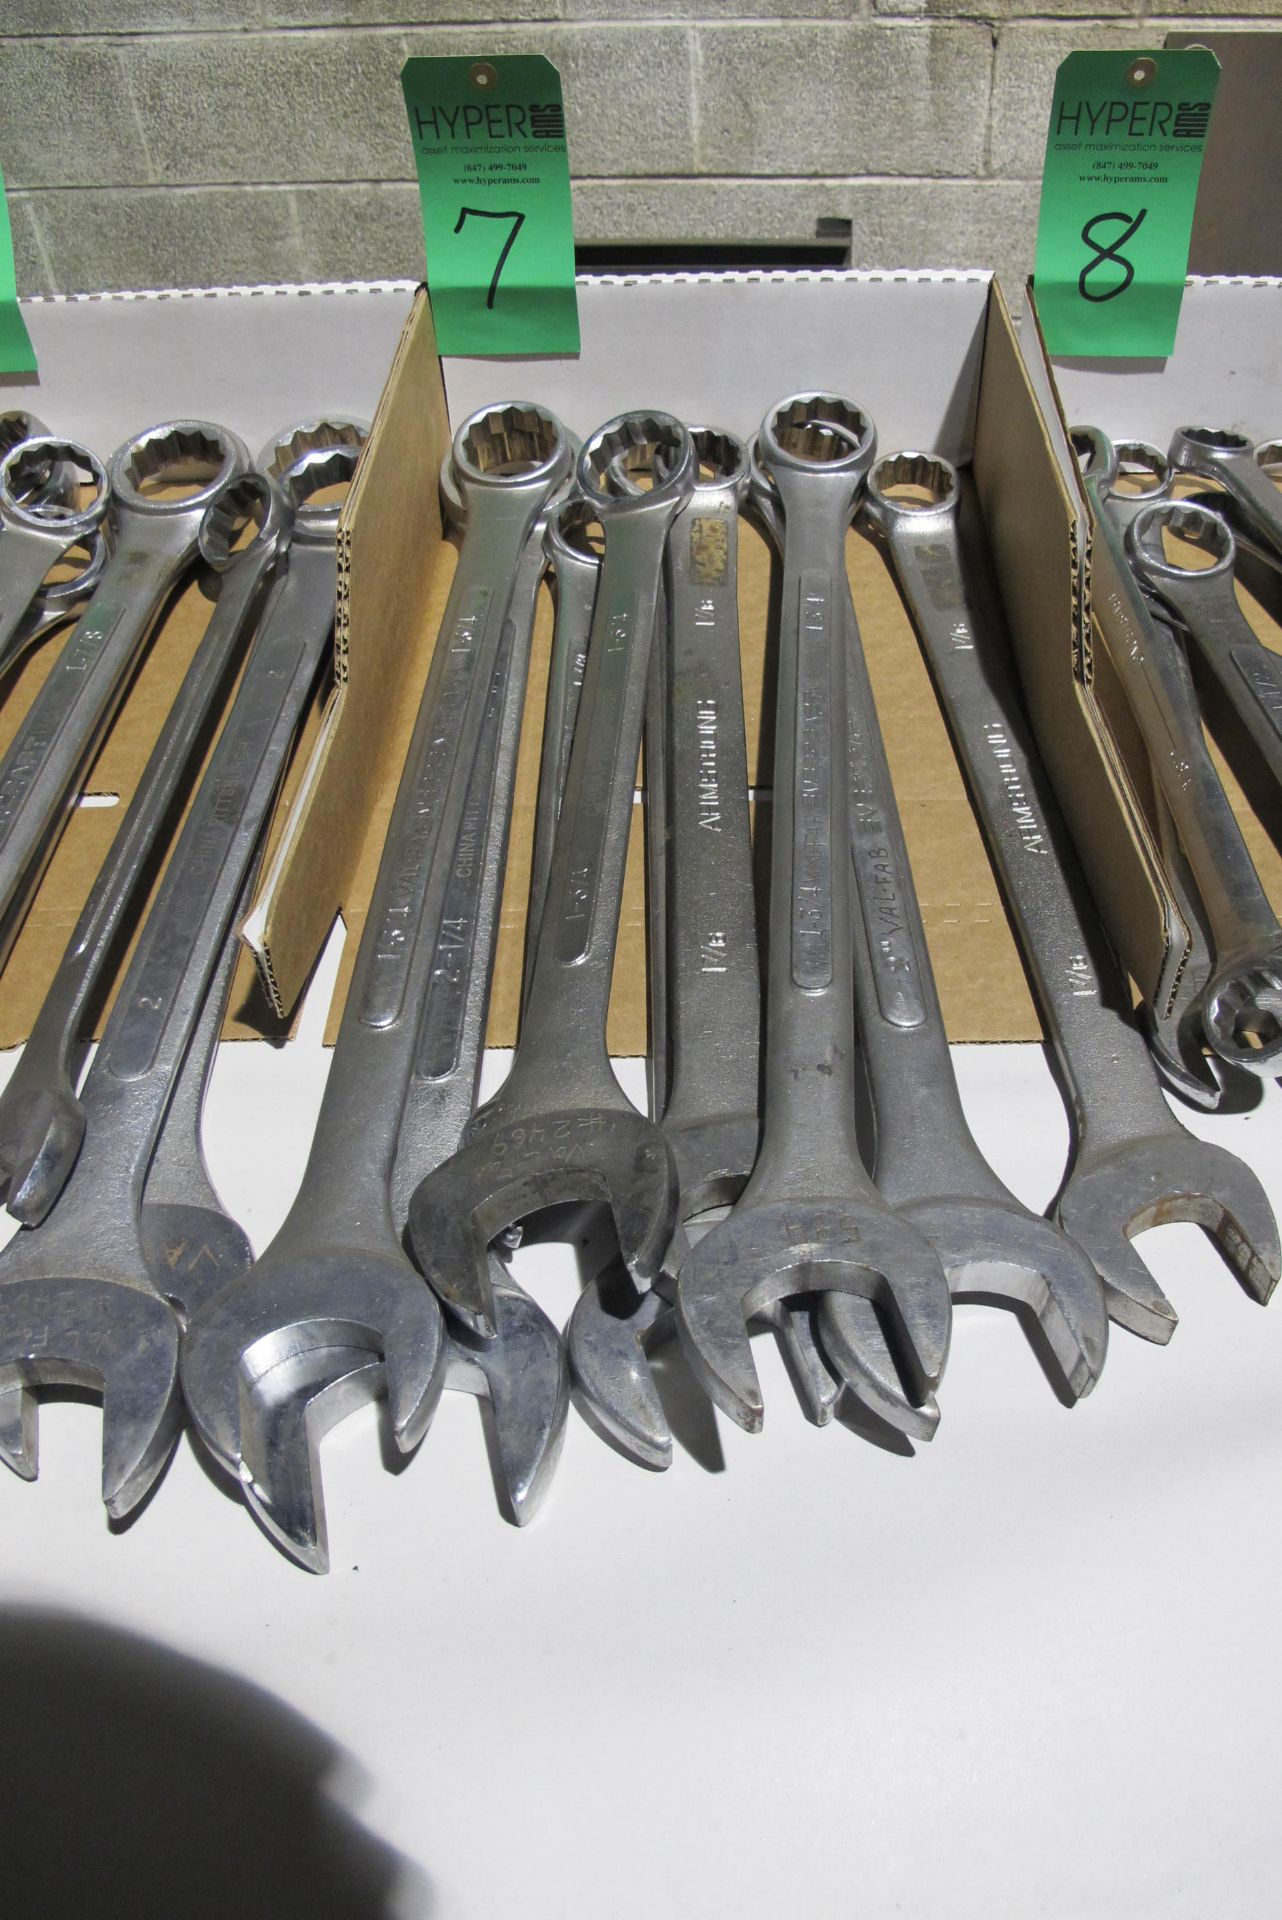 Heavy Duty open & closed end wrenches